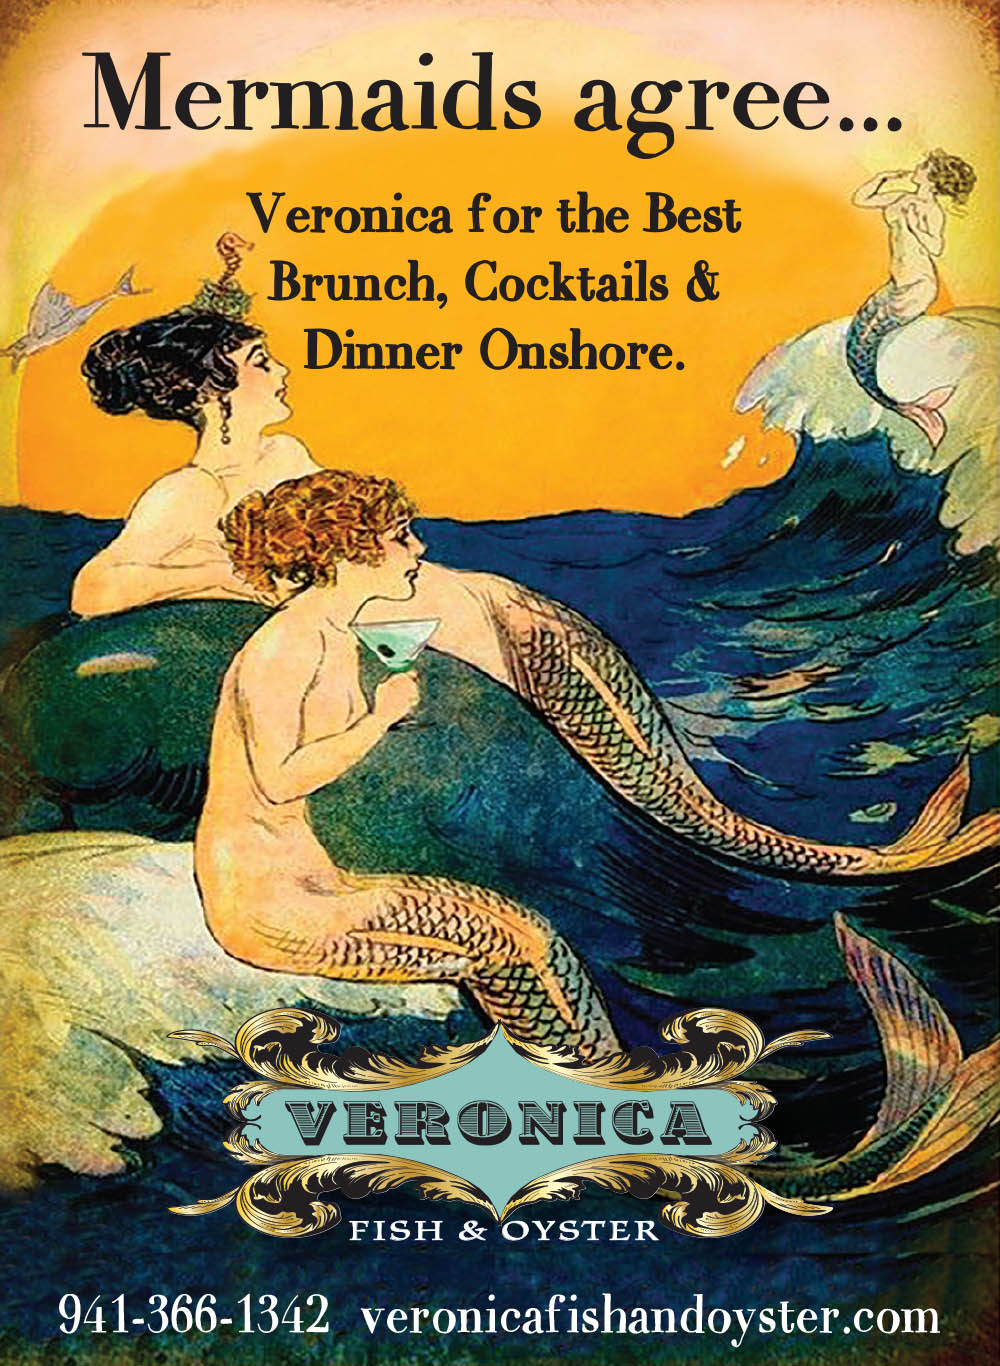 Veronica Fish & Oyster - Ad